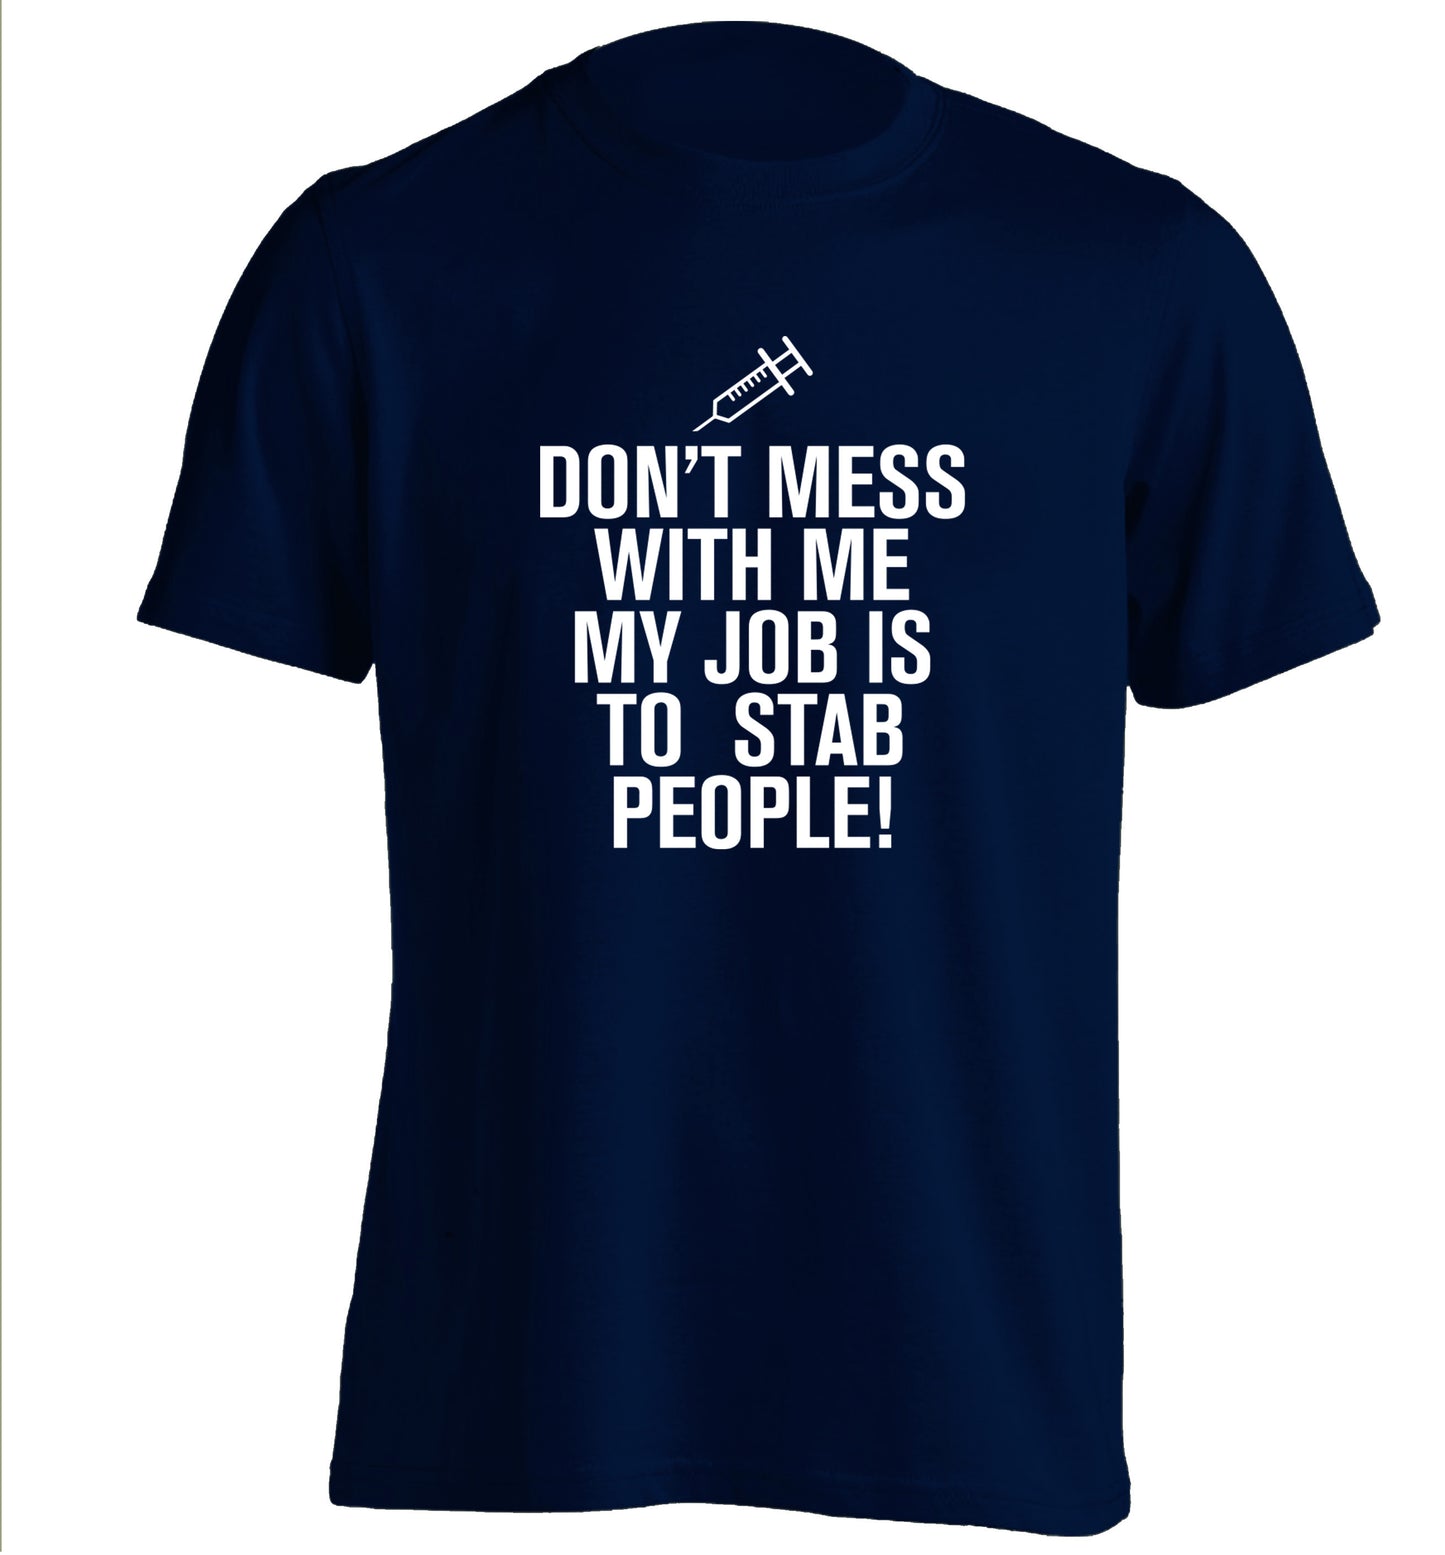 Don't mess with me my job is to stab people! adults unisex navy Tshirt 2XL